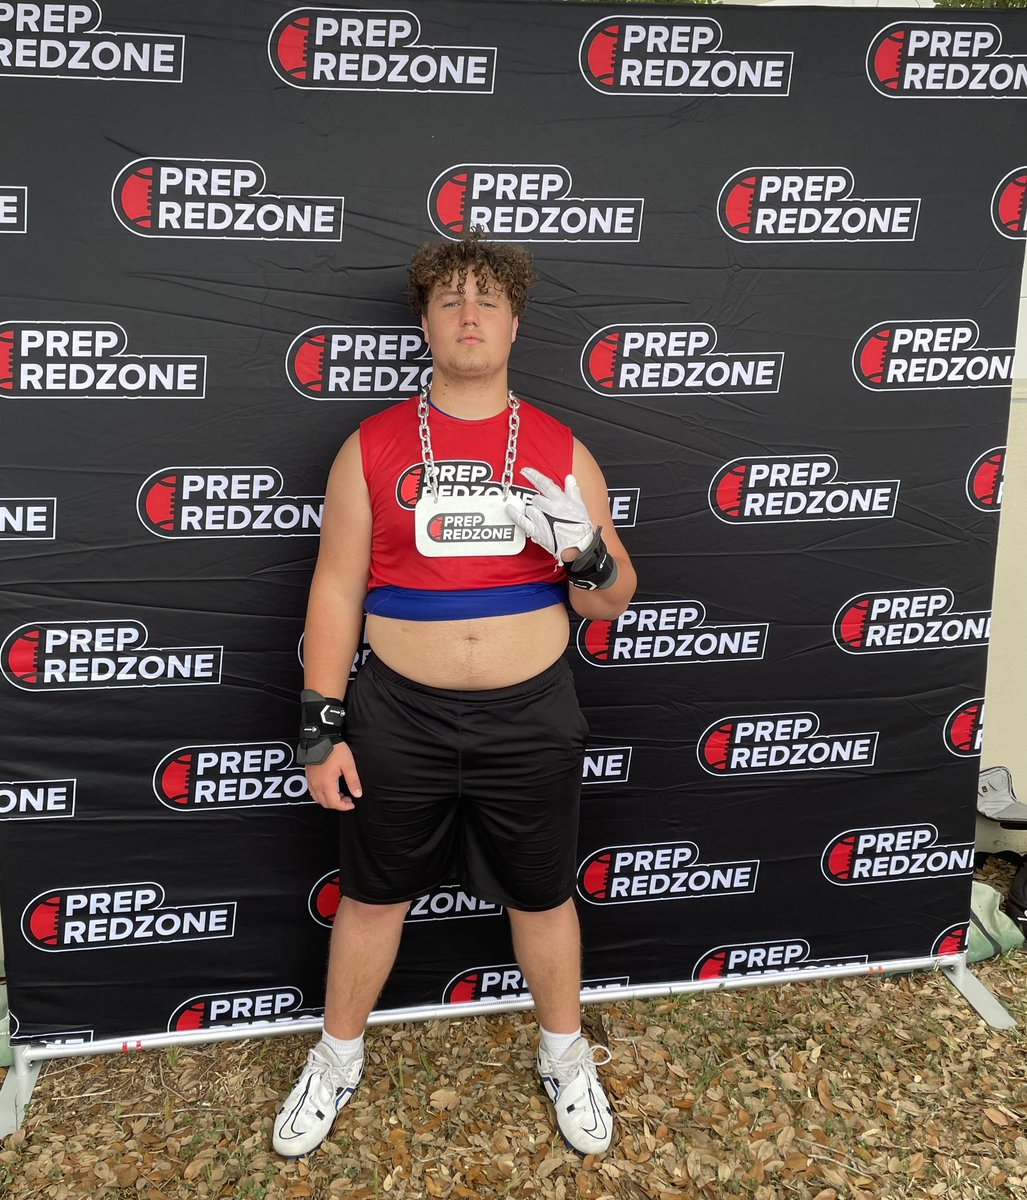 Blessed to be able to compete today at Prep Redzone Florida Combine. Had a great time and earned OL MVP‼️ Ready for Spring ball. @Bolles_Football @DeshawnBrownInc @Alphasportsra @PrepRedzoneFL @904OL @CoachSpera